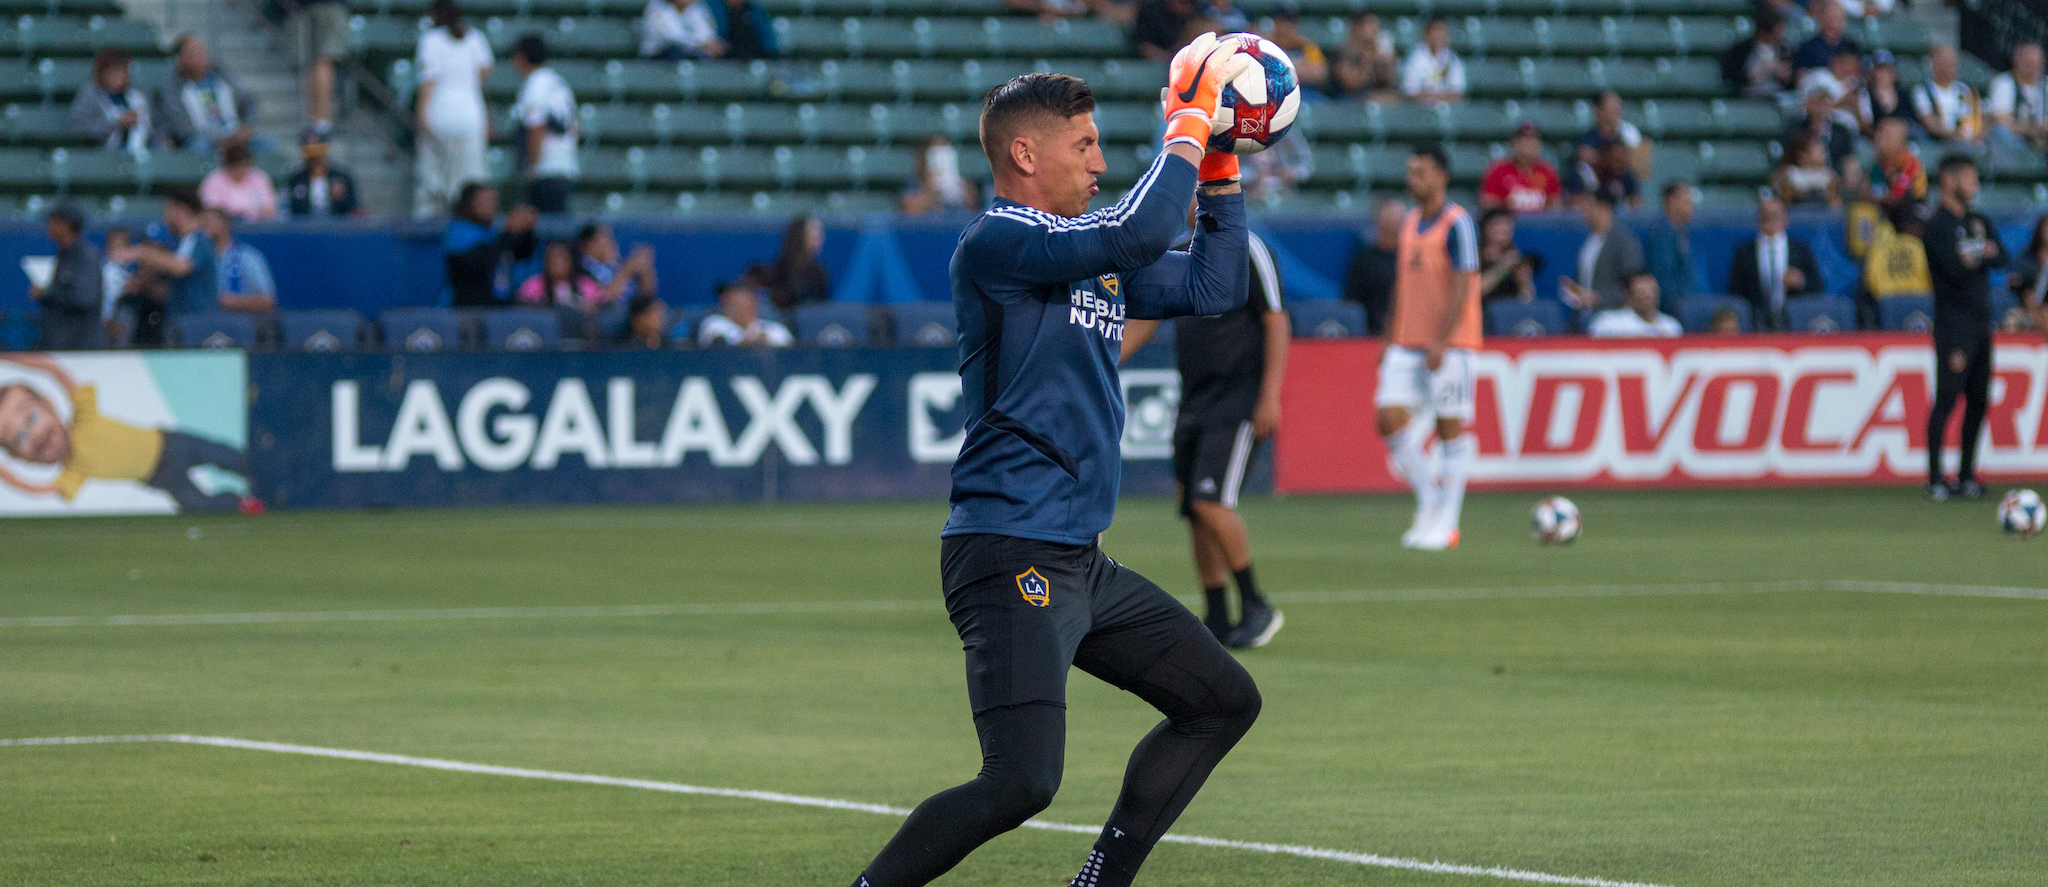 David Bingham warms up for the LA Galaxy on 7.12.19 -- Photo by Brittany Campbell